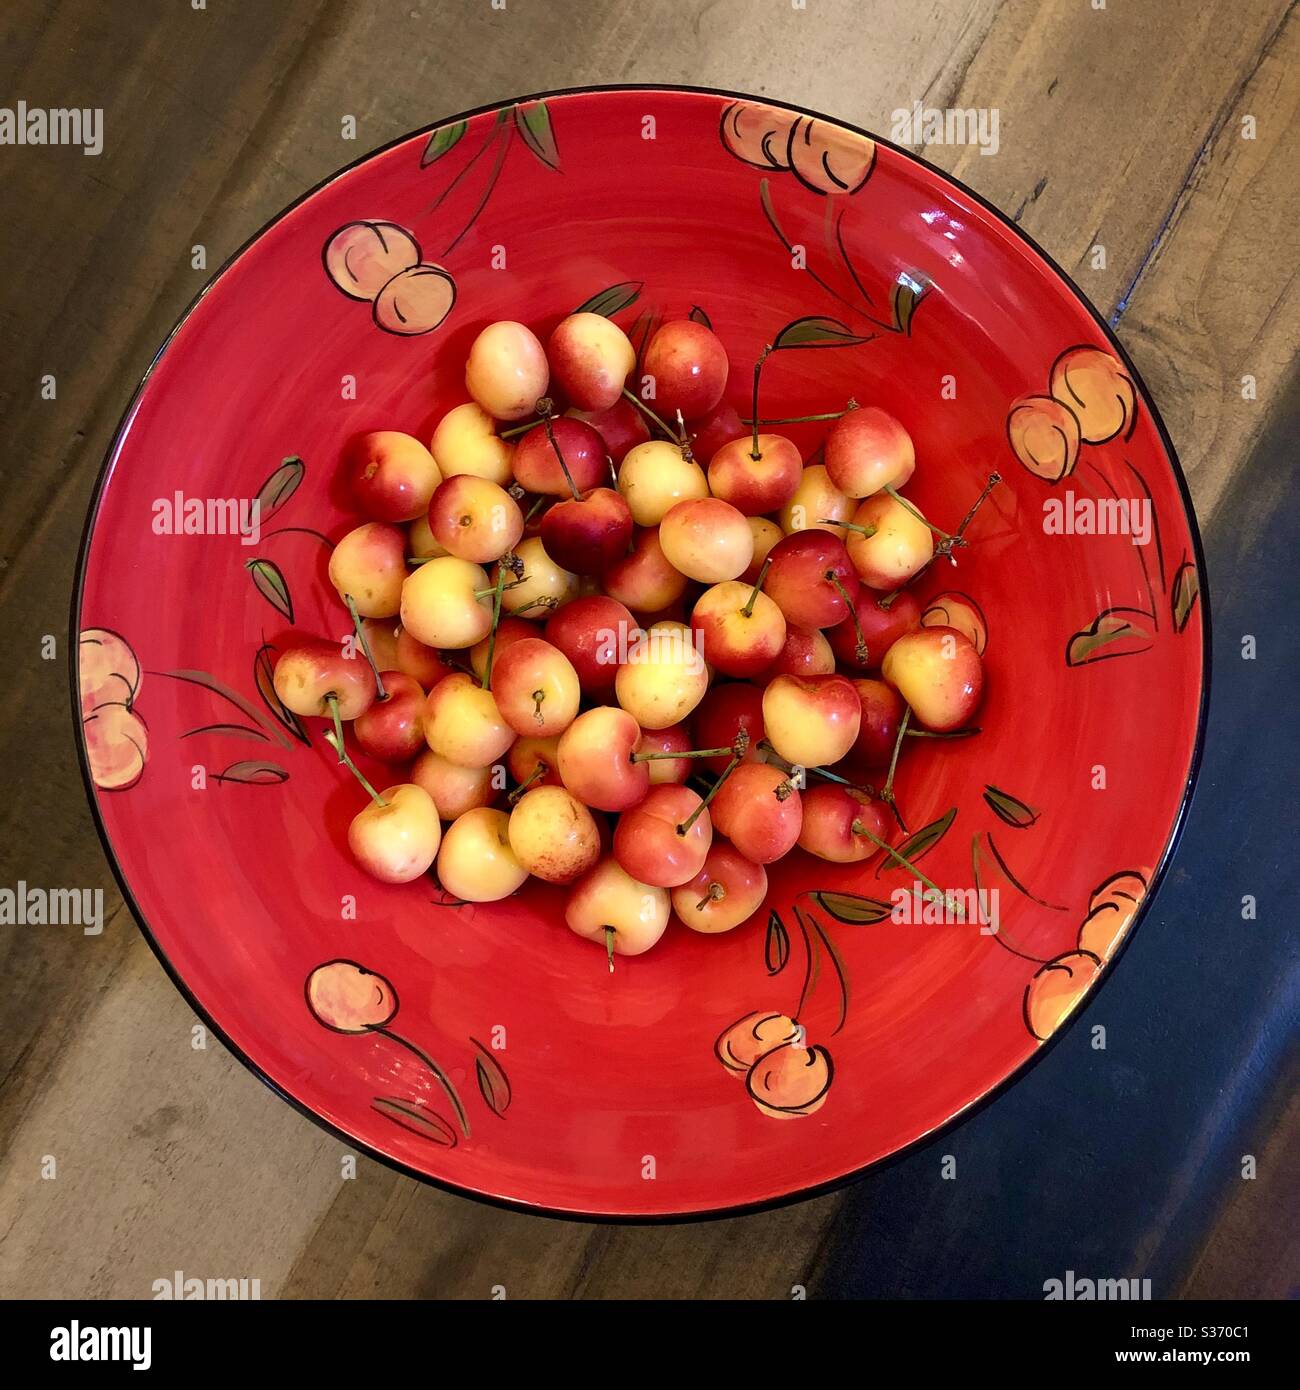 Overview of a bowl of rainier cherries in a handpainted ceramic bowl with a rainier cherry motif. Stock Photo